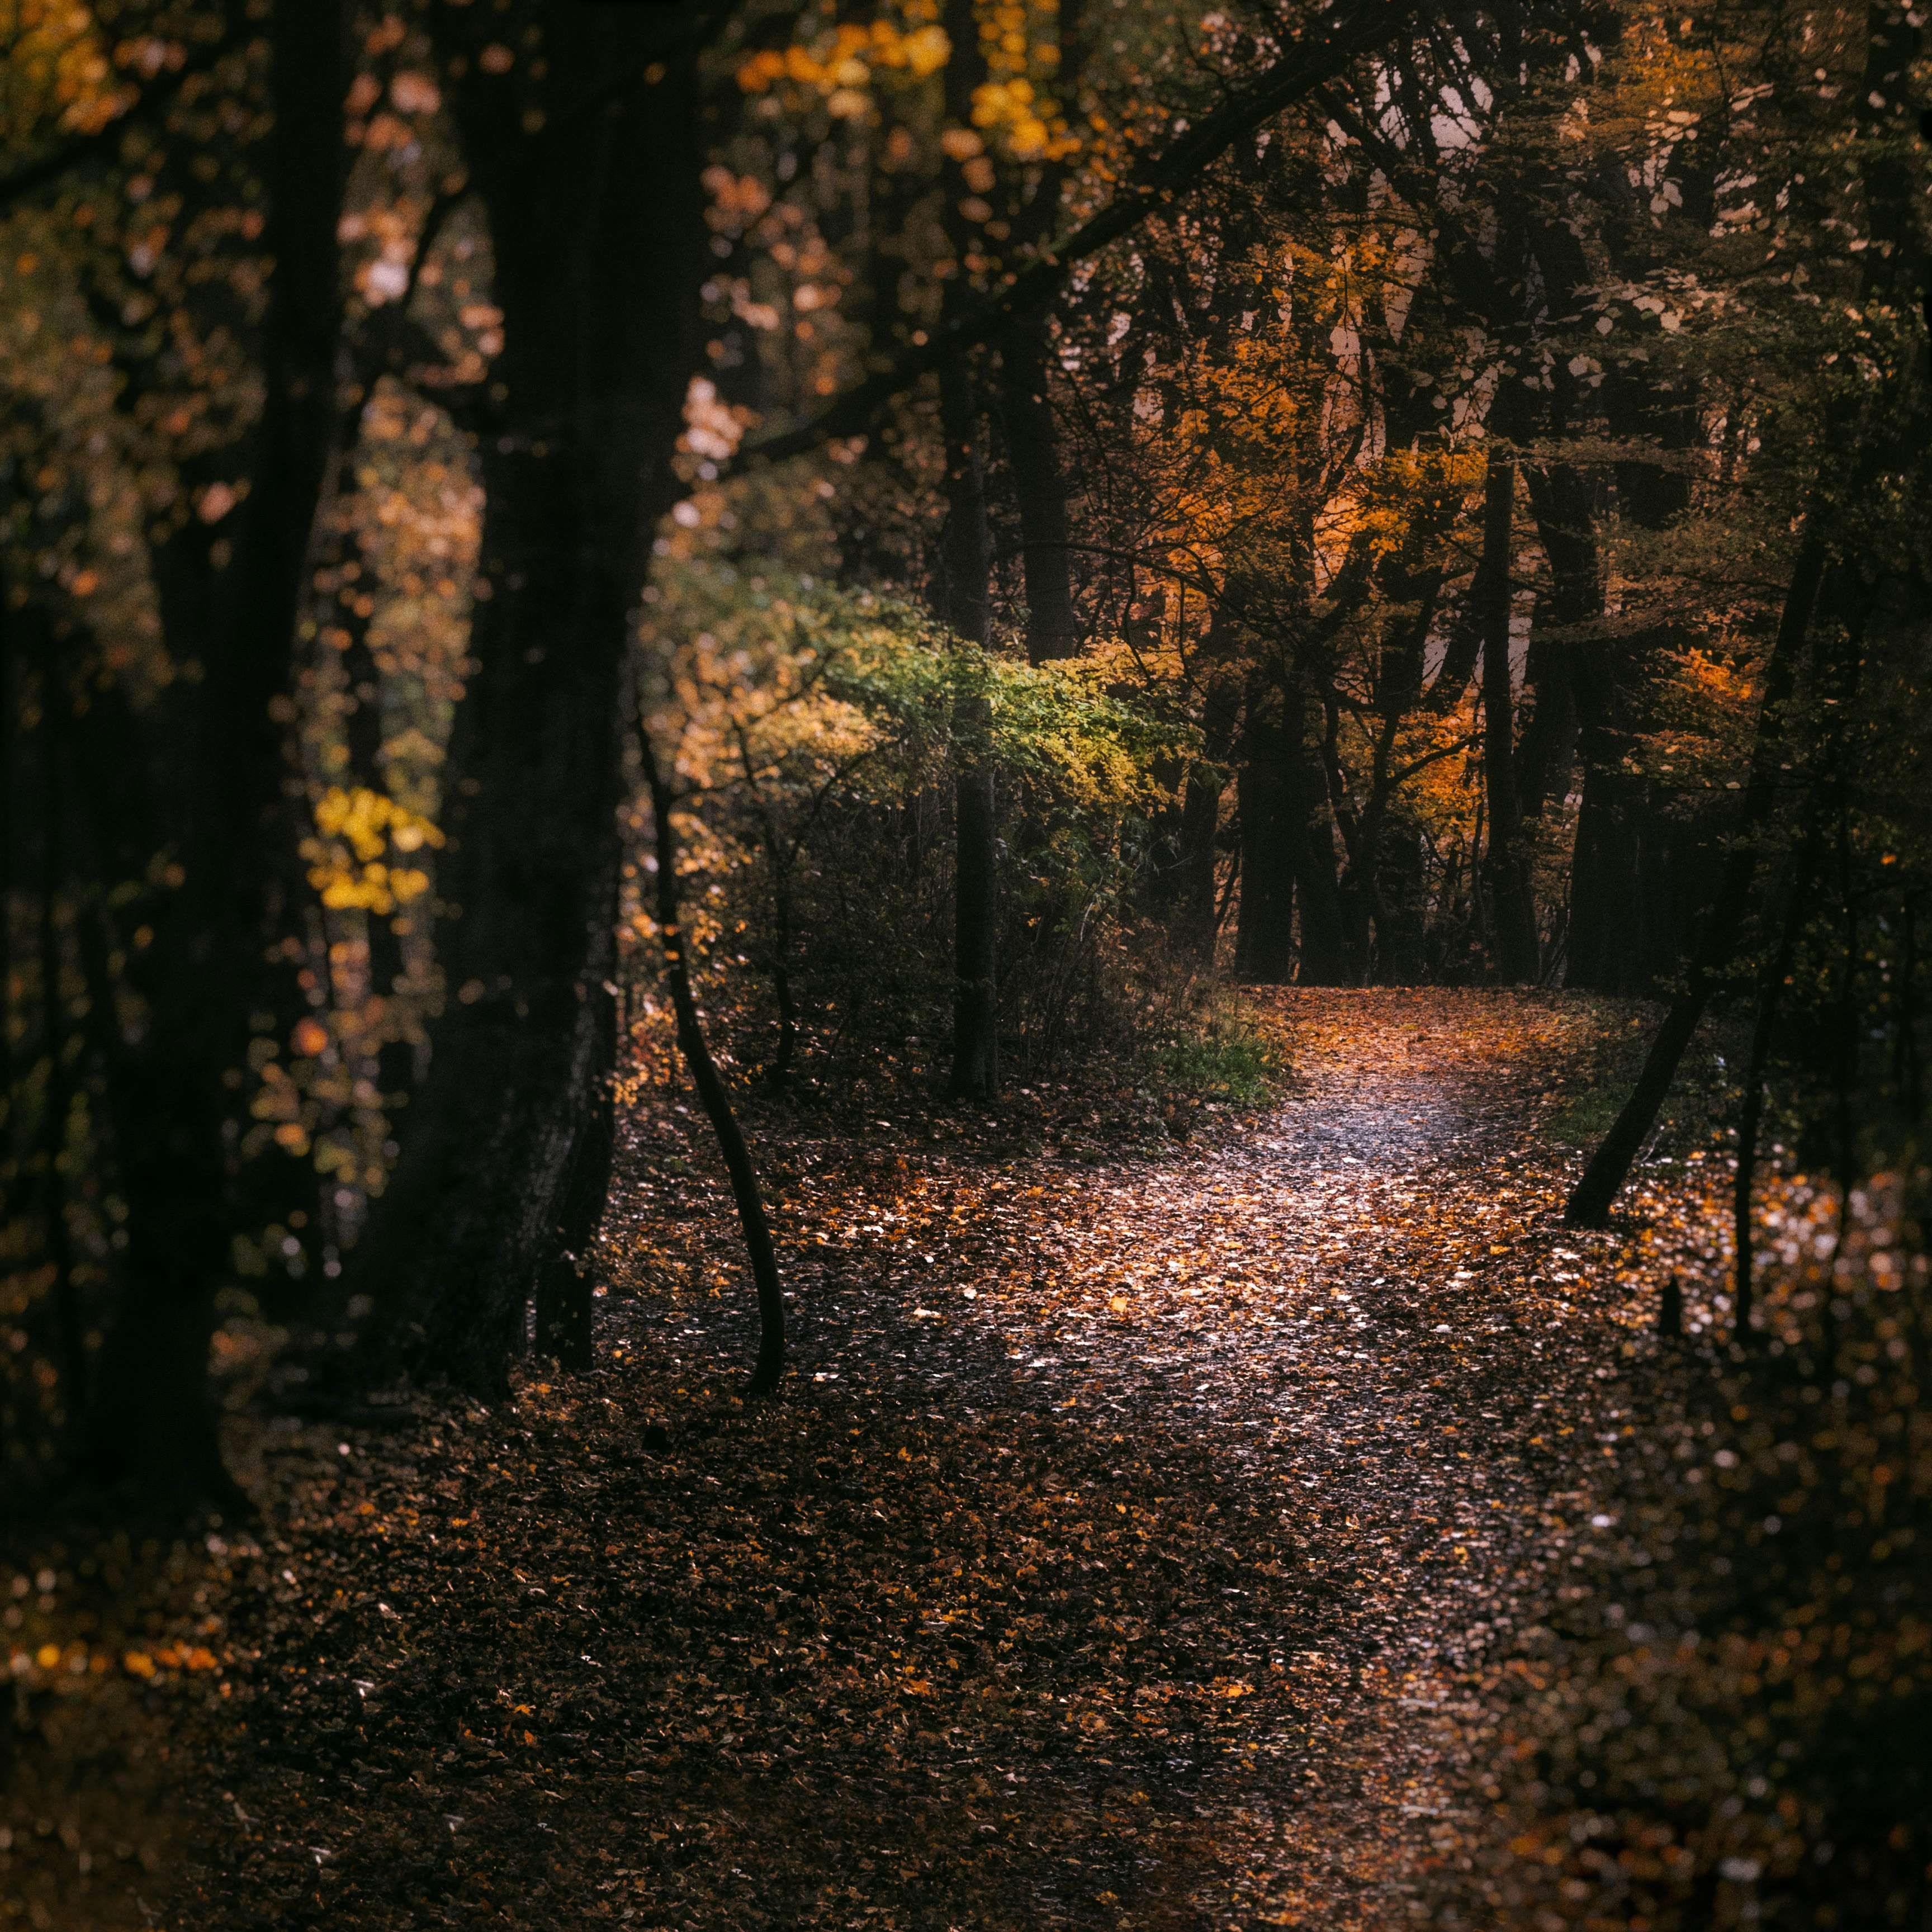 austria #autumn #autumn leaves #autumn mood forest #autumnal #away #colors of autumn #dark #fall leaves #foot path #forest #forest path #passage way #path #vib